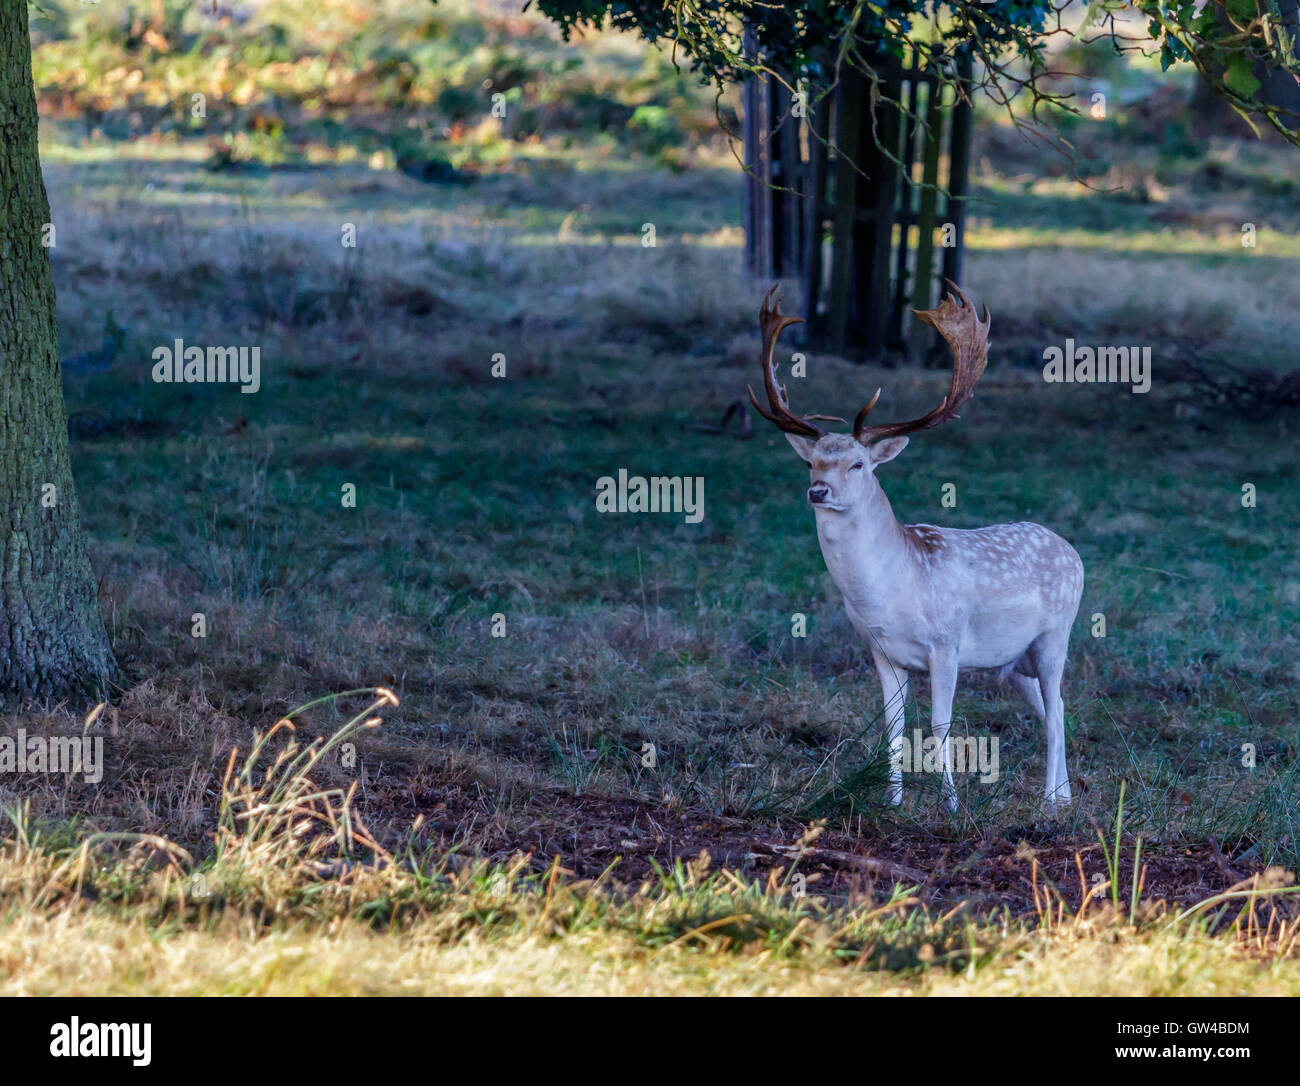 Deer In Richmond Park London England. These were taken in a very early Autumn morning . Stock Photo